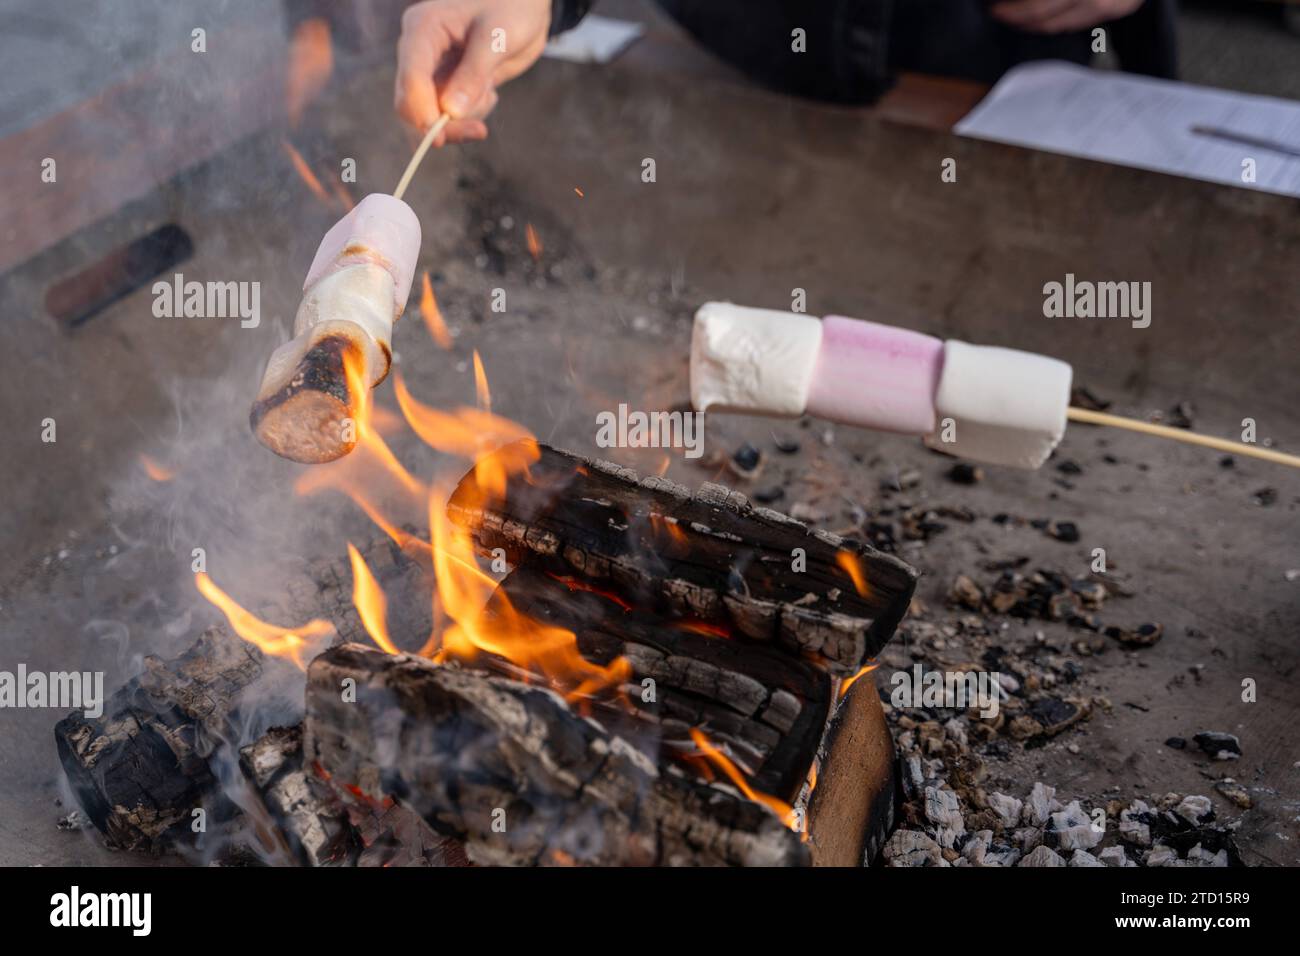 Southampton, England - December 8, 2023: Hands holding marshmallows on a wooden skewer over a fire. Grilled marshmallows *** Hände halten Marshmallows auf einem Holzspieß über ein Feuer. Gegrillte Marshmallows Stock Photo